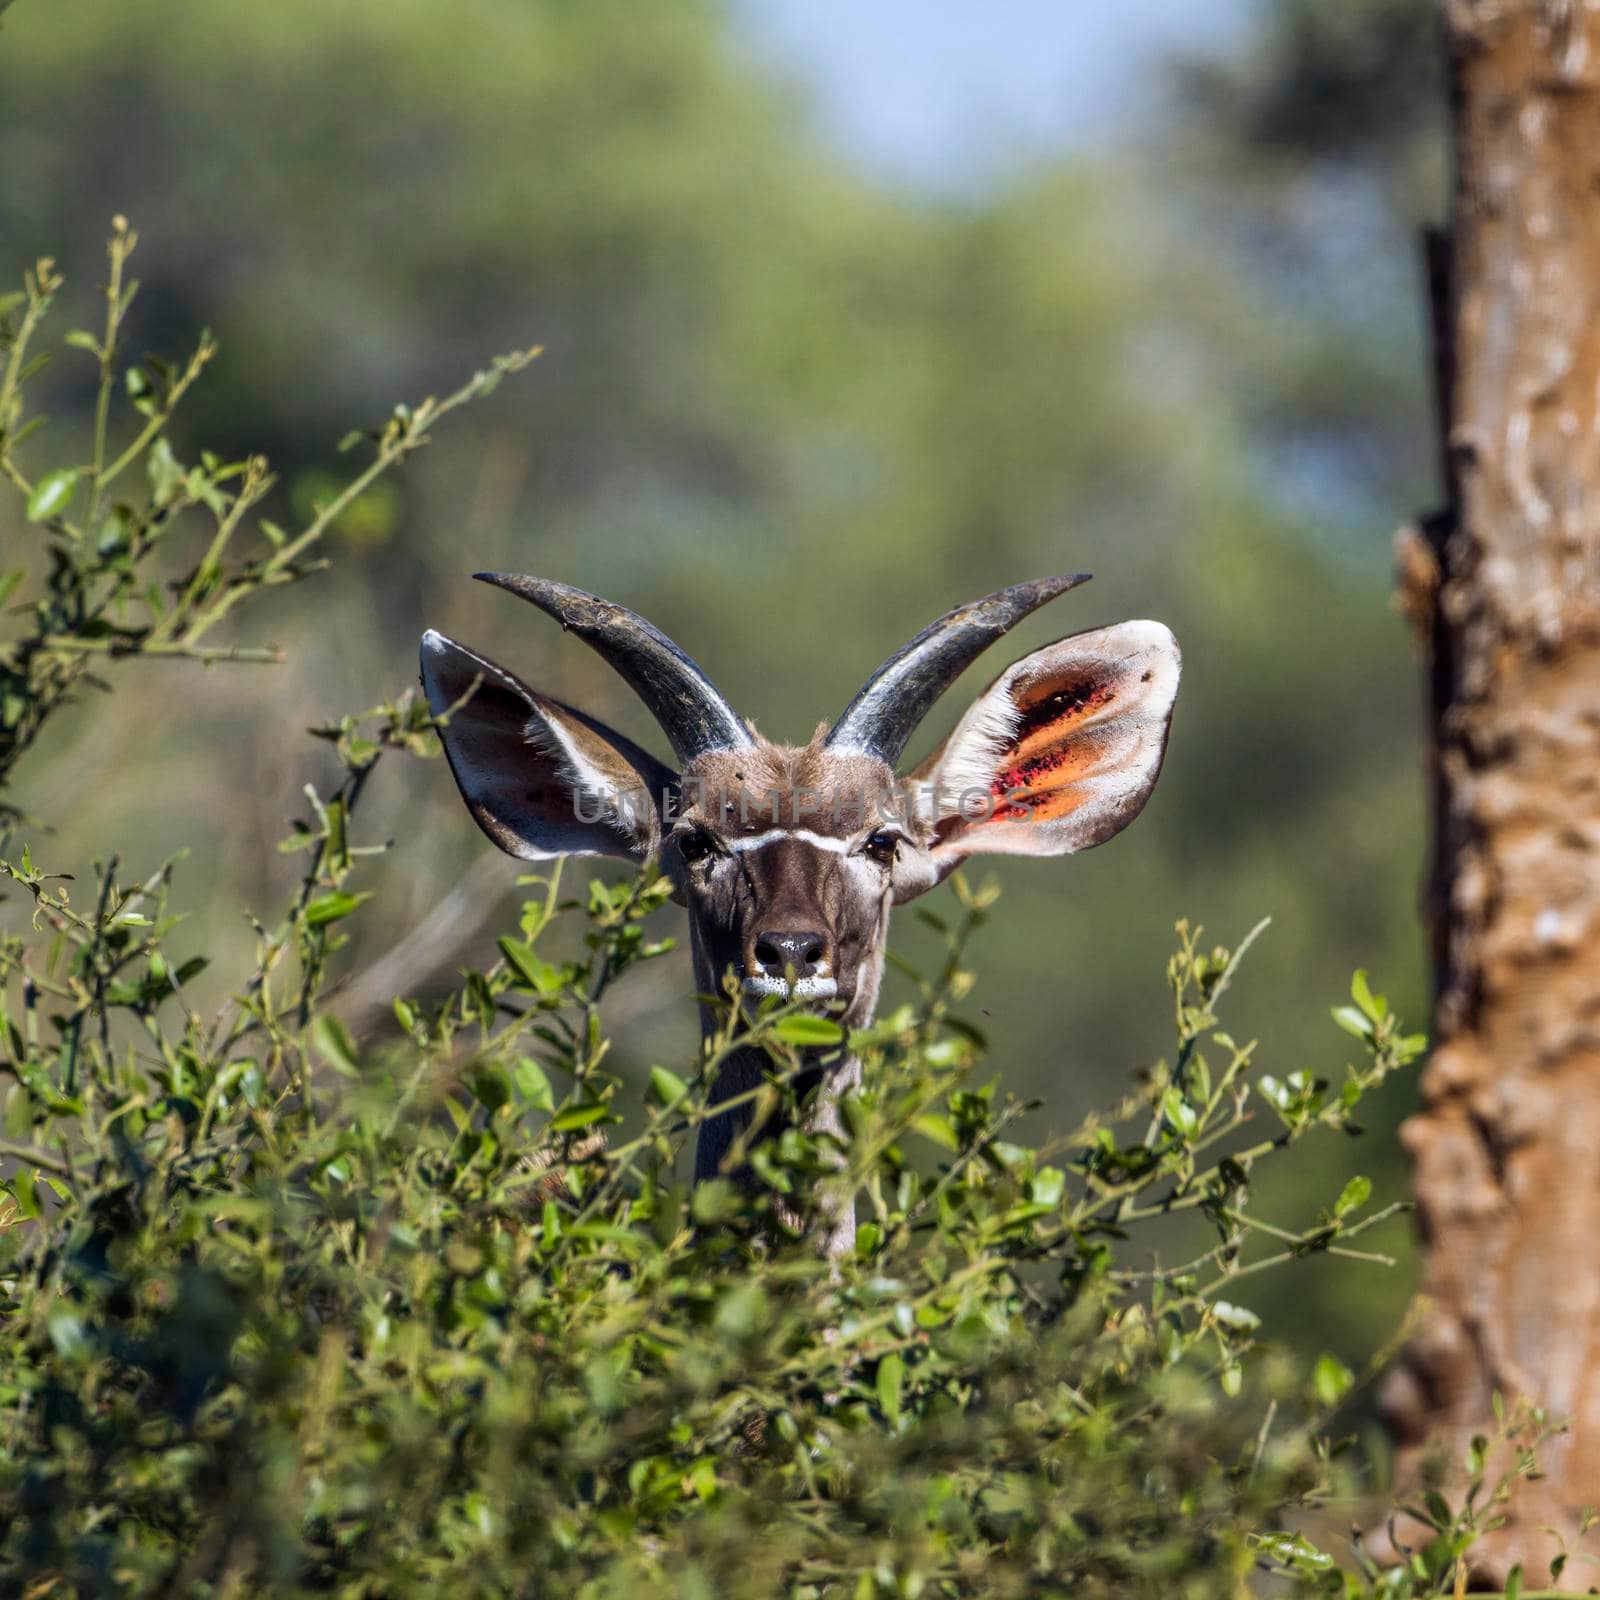 Nyala in Kruger National park, South Africa by PACOCOMO